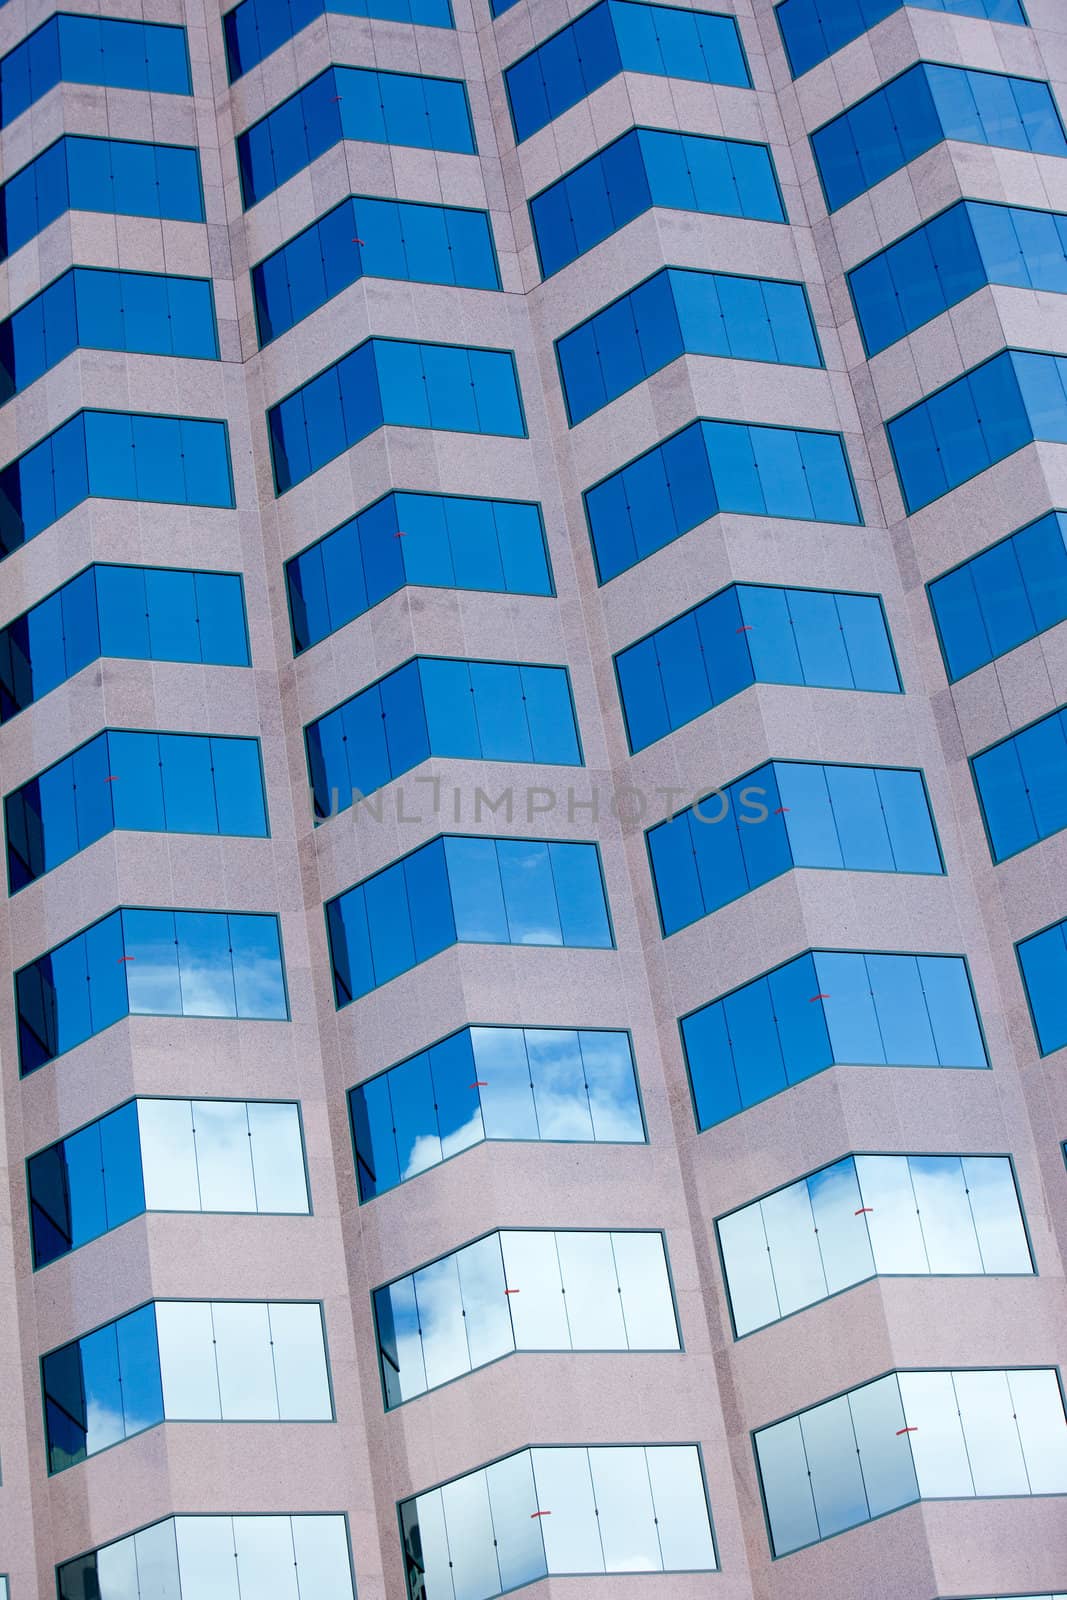 A grid of windows from an office building